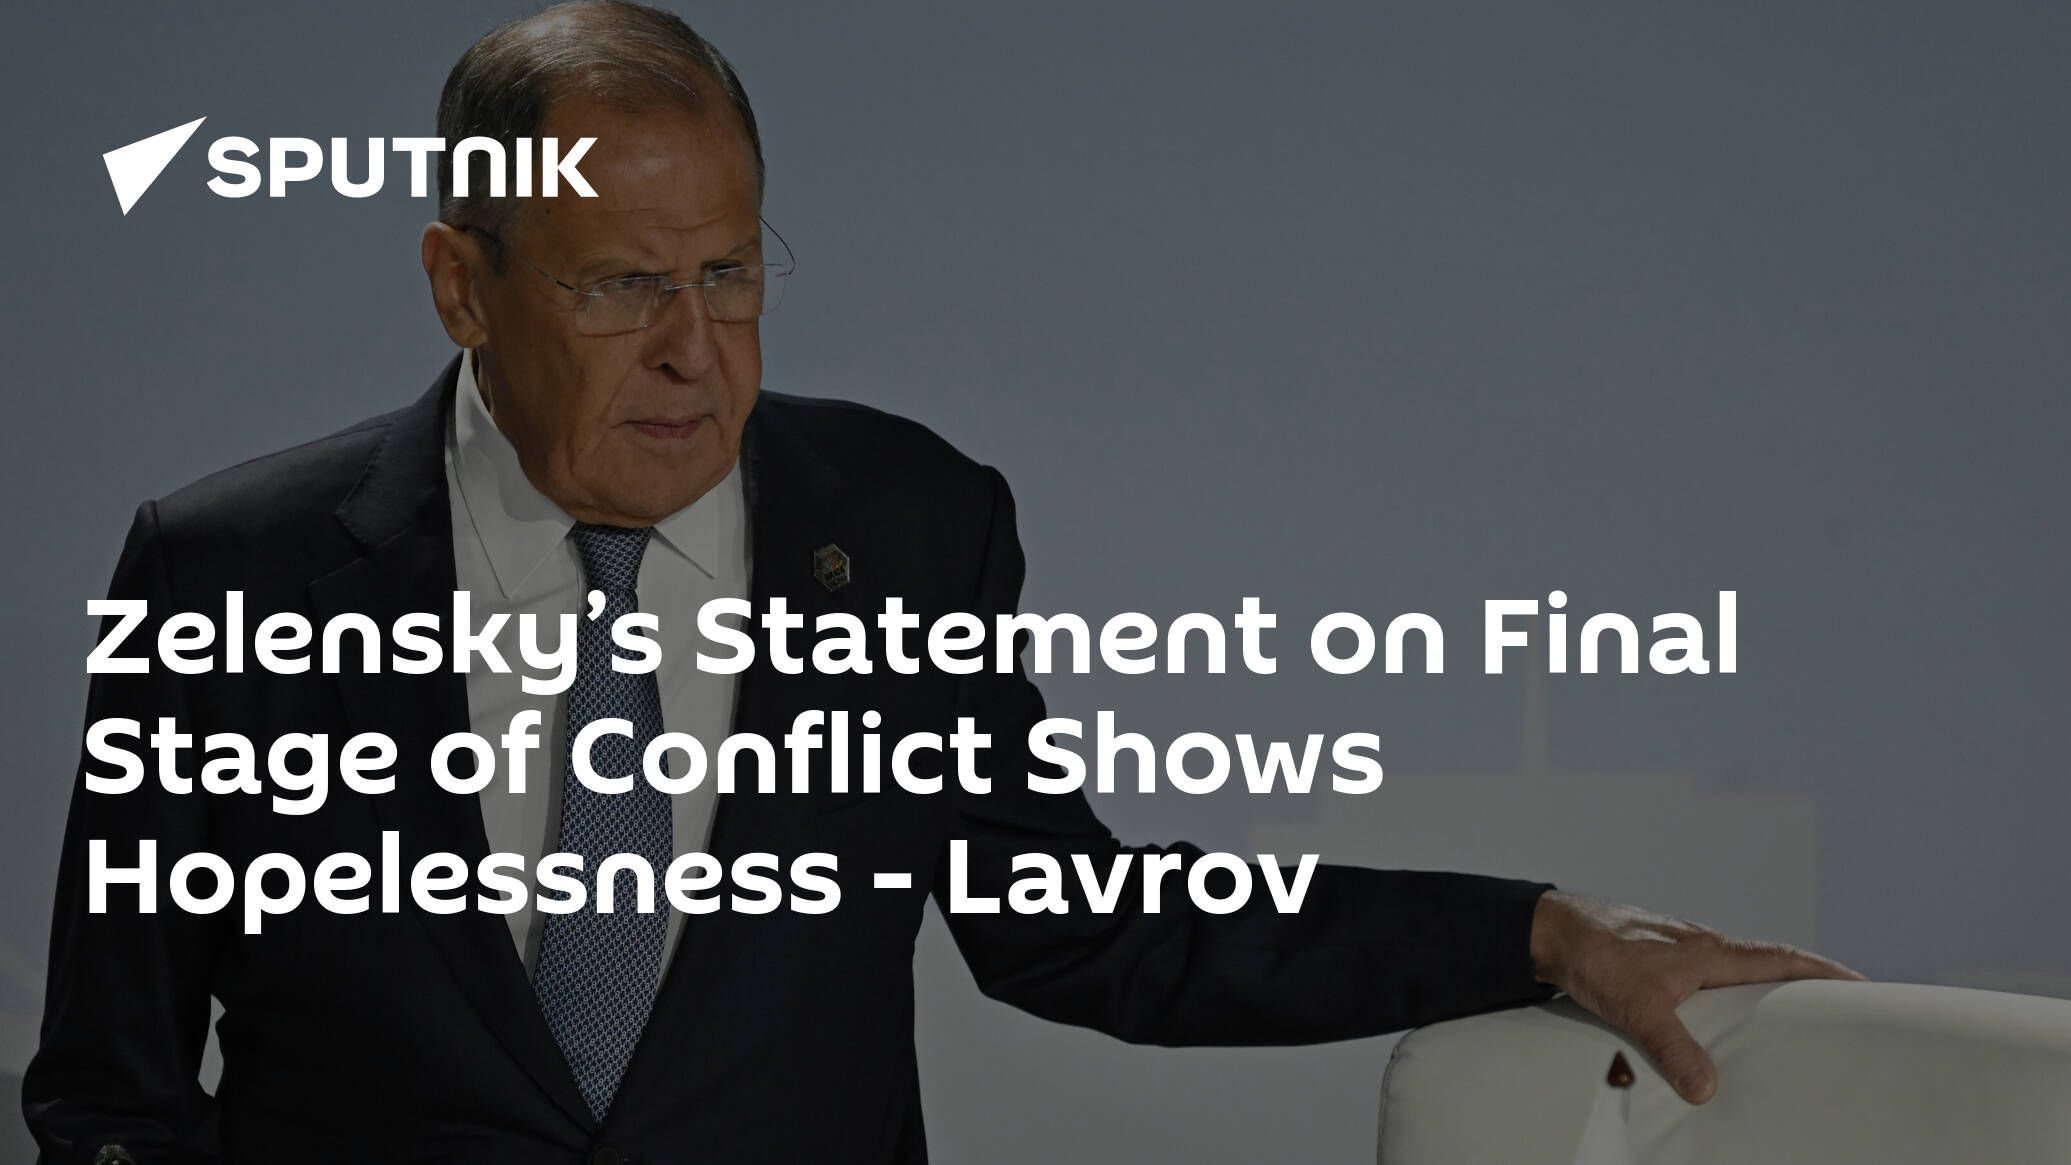 Zelensky’s Statement on Final Stage of Conflict Shows Hopelessness – Lavrov